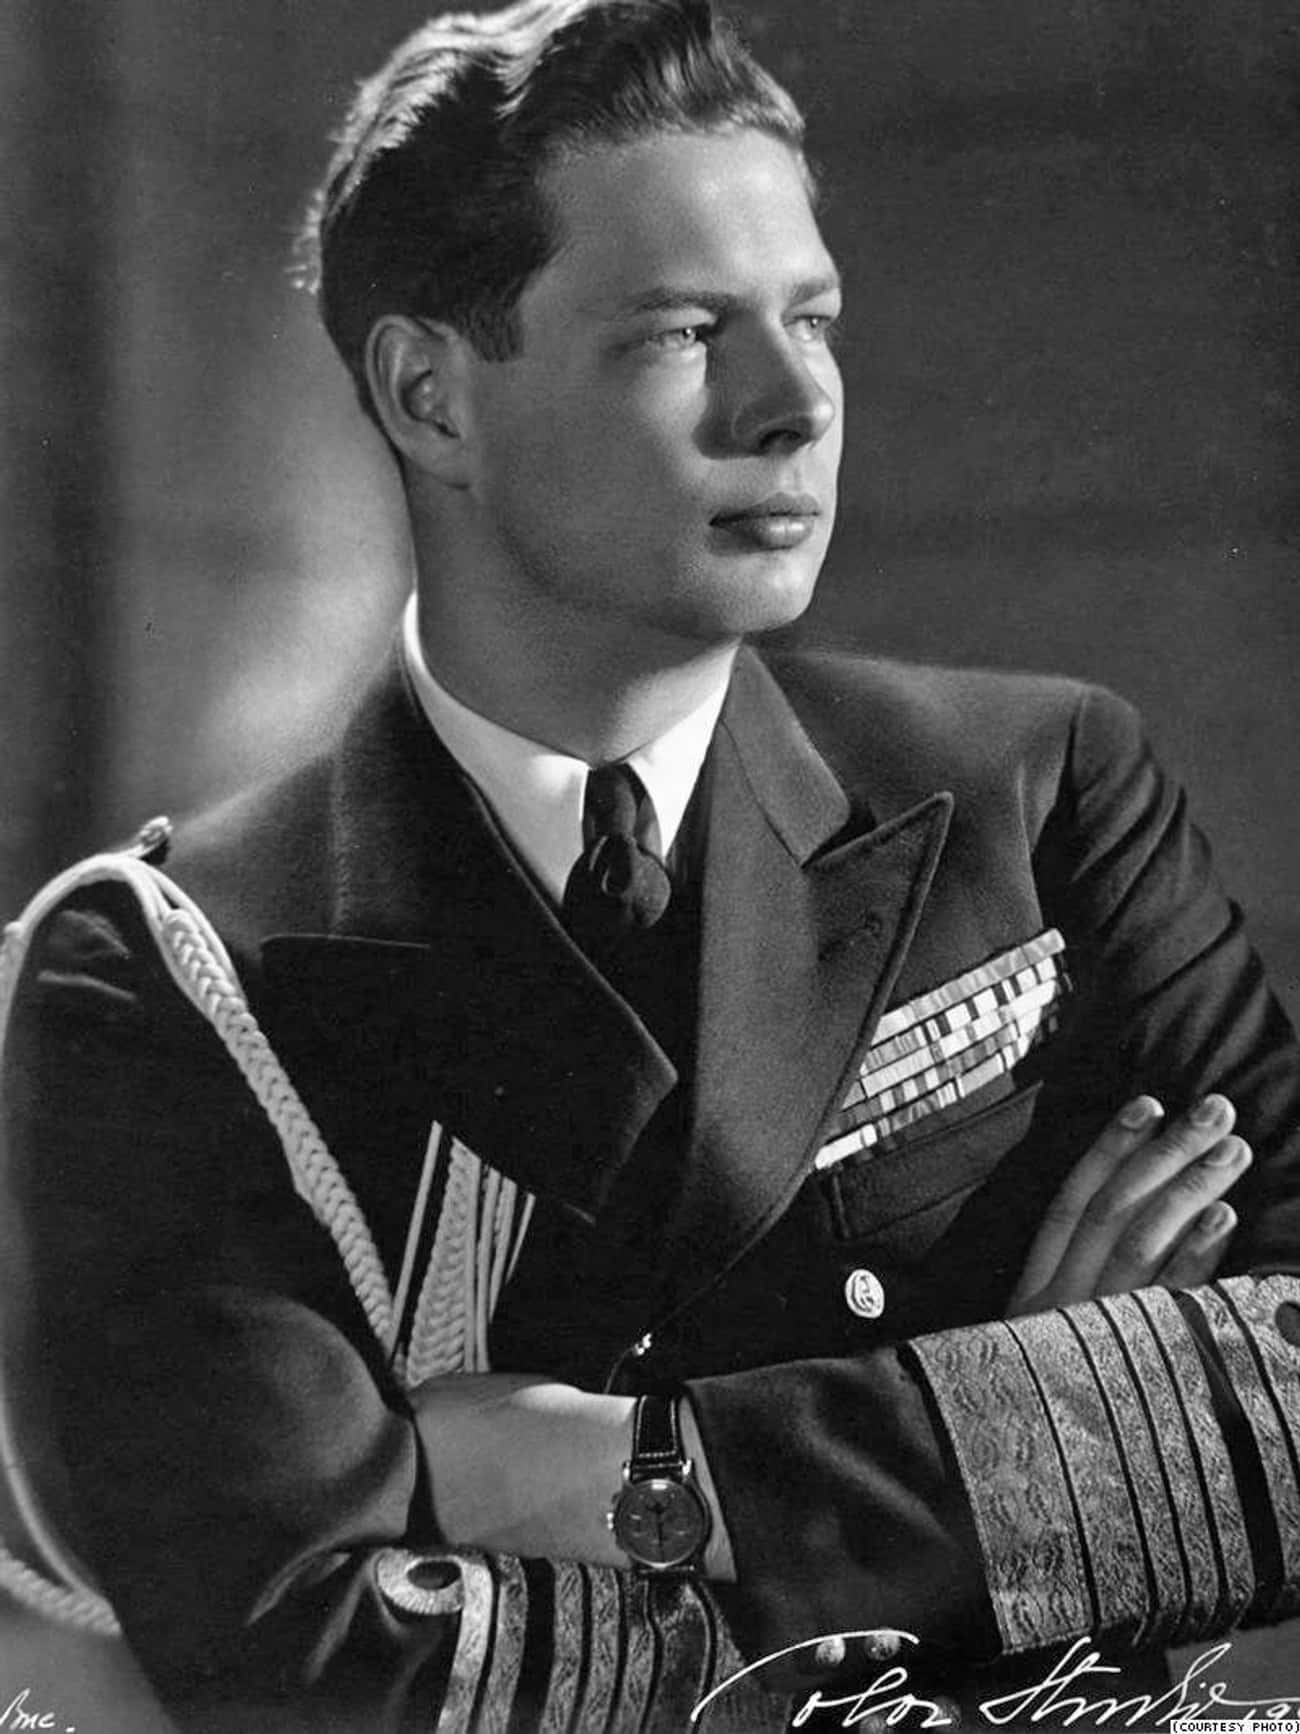 King Michael I Of Romania Overthrew A Dictator To Recover His Kingdom From The Nazis